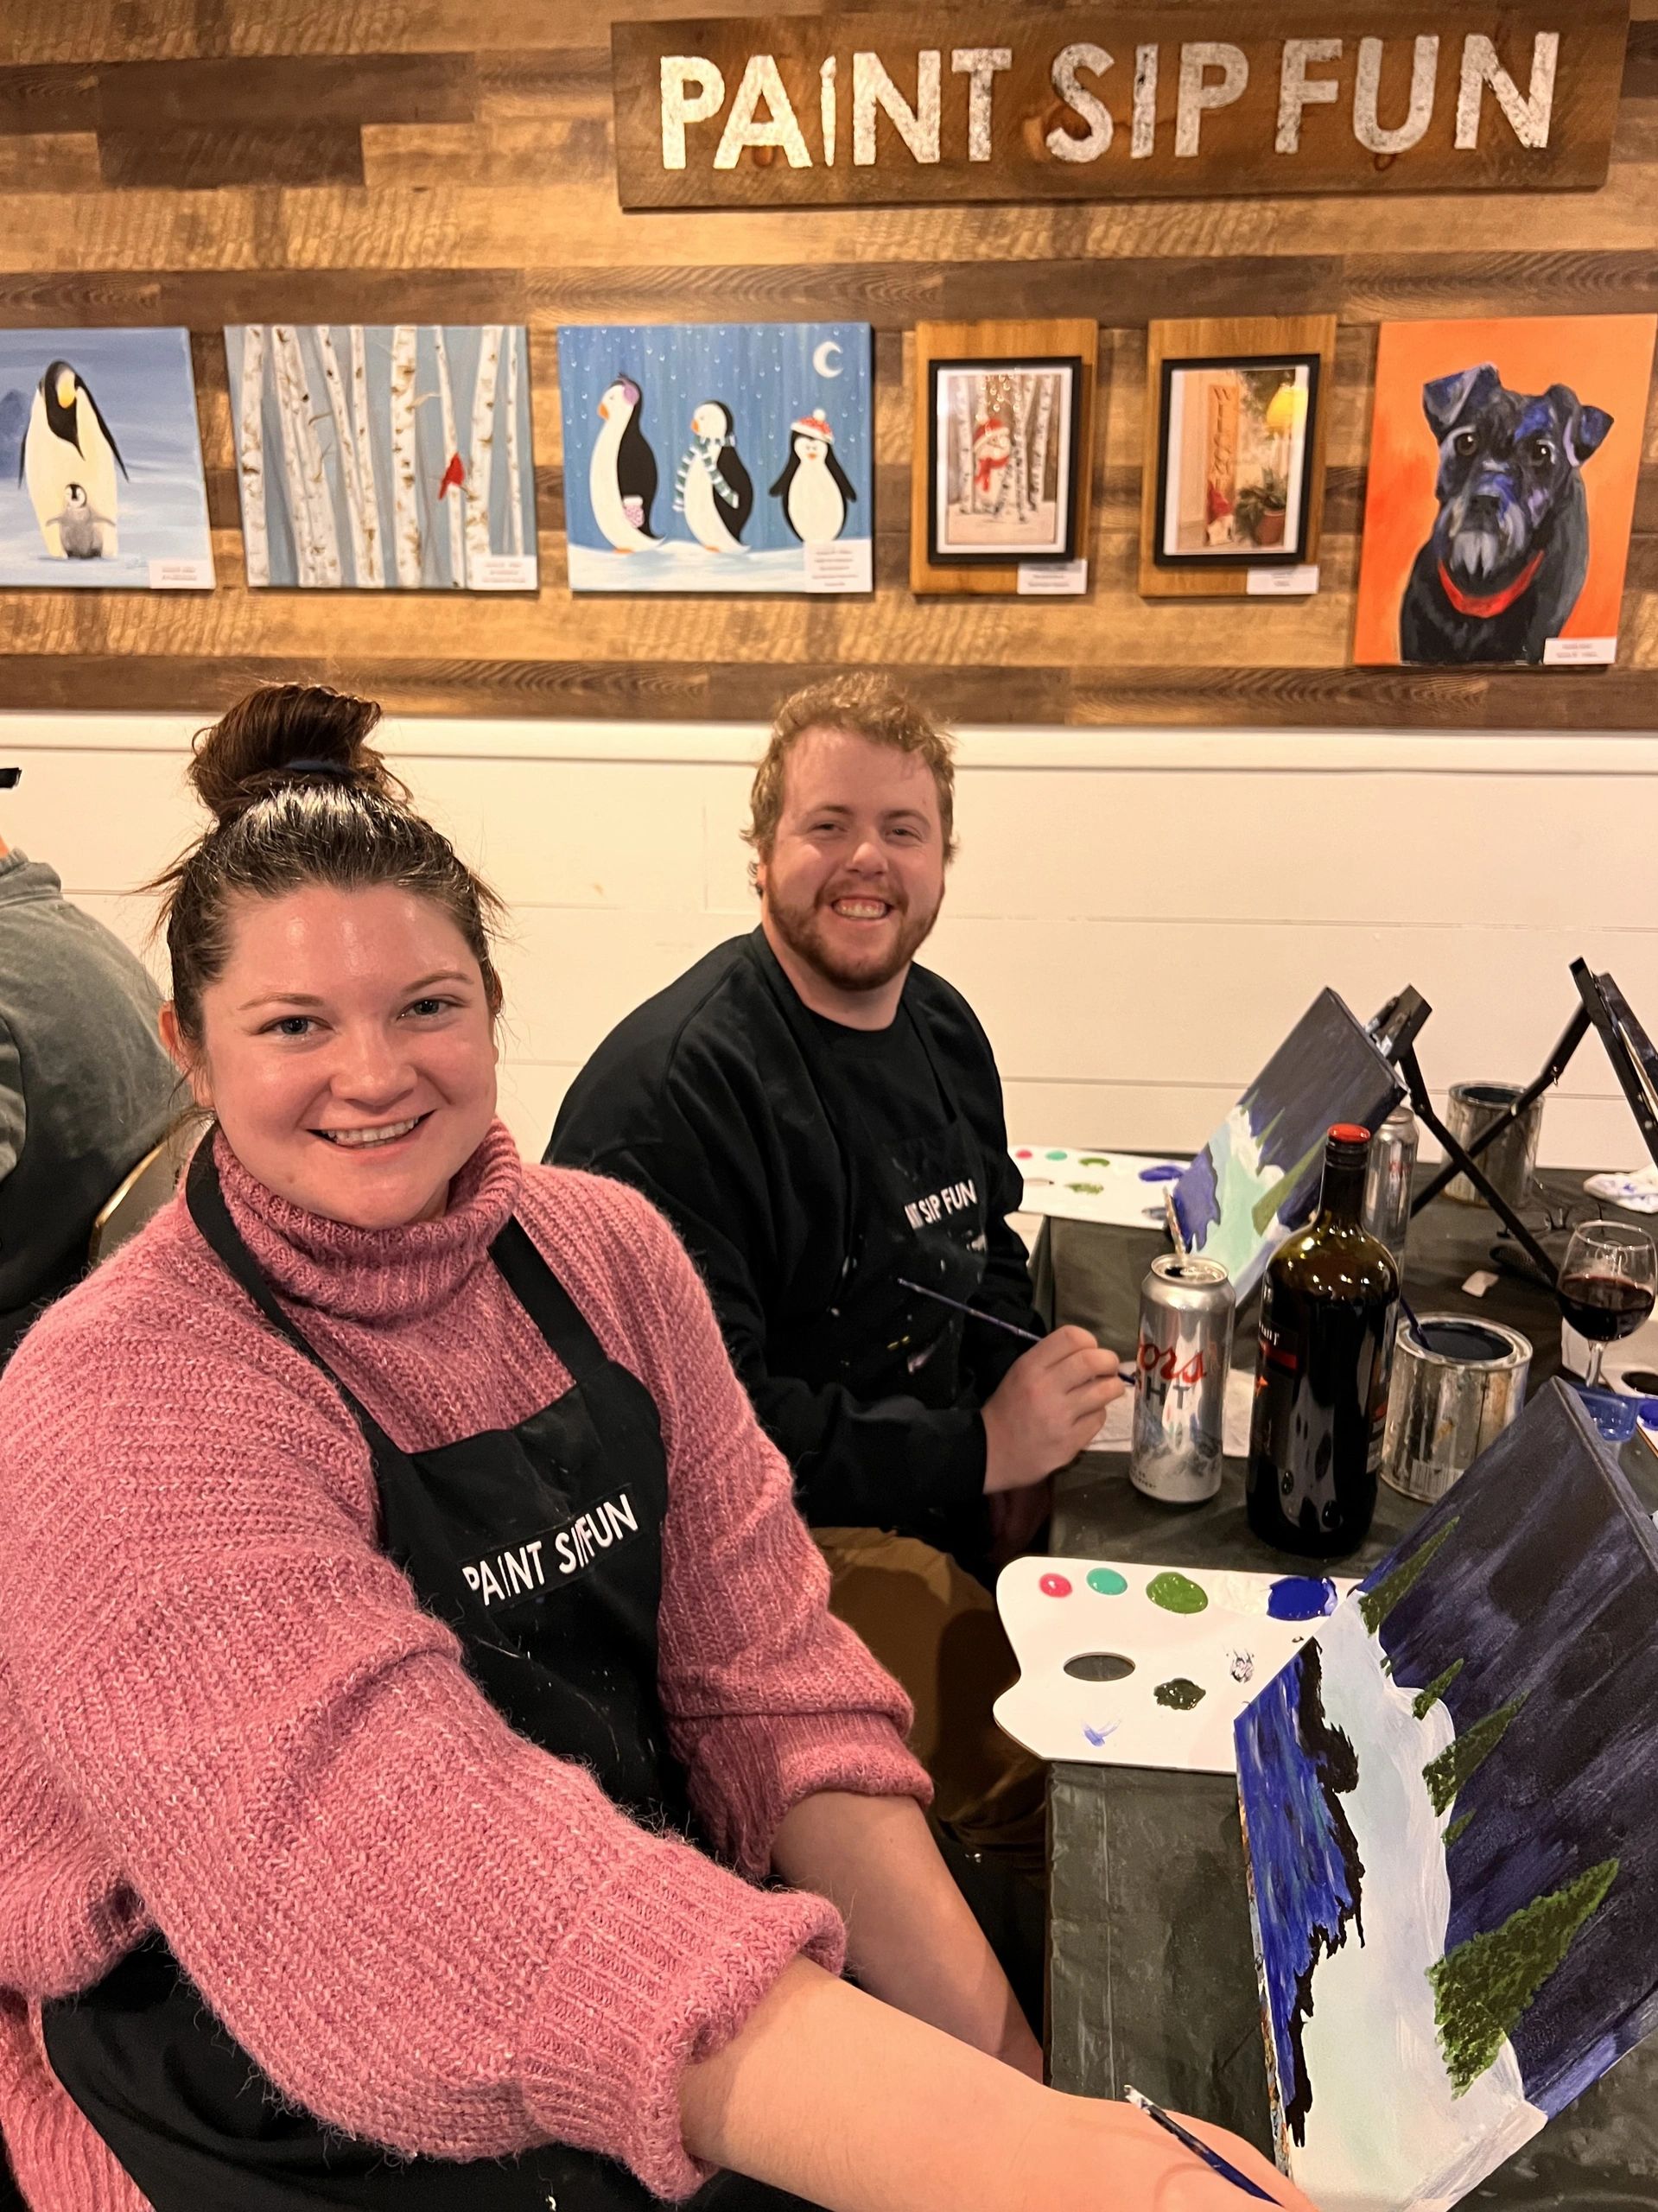 In the old Paint Sip Fun art studio - Now a mobile art studio by artist Erin Leigh Boughamer